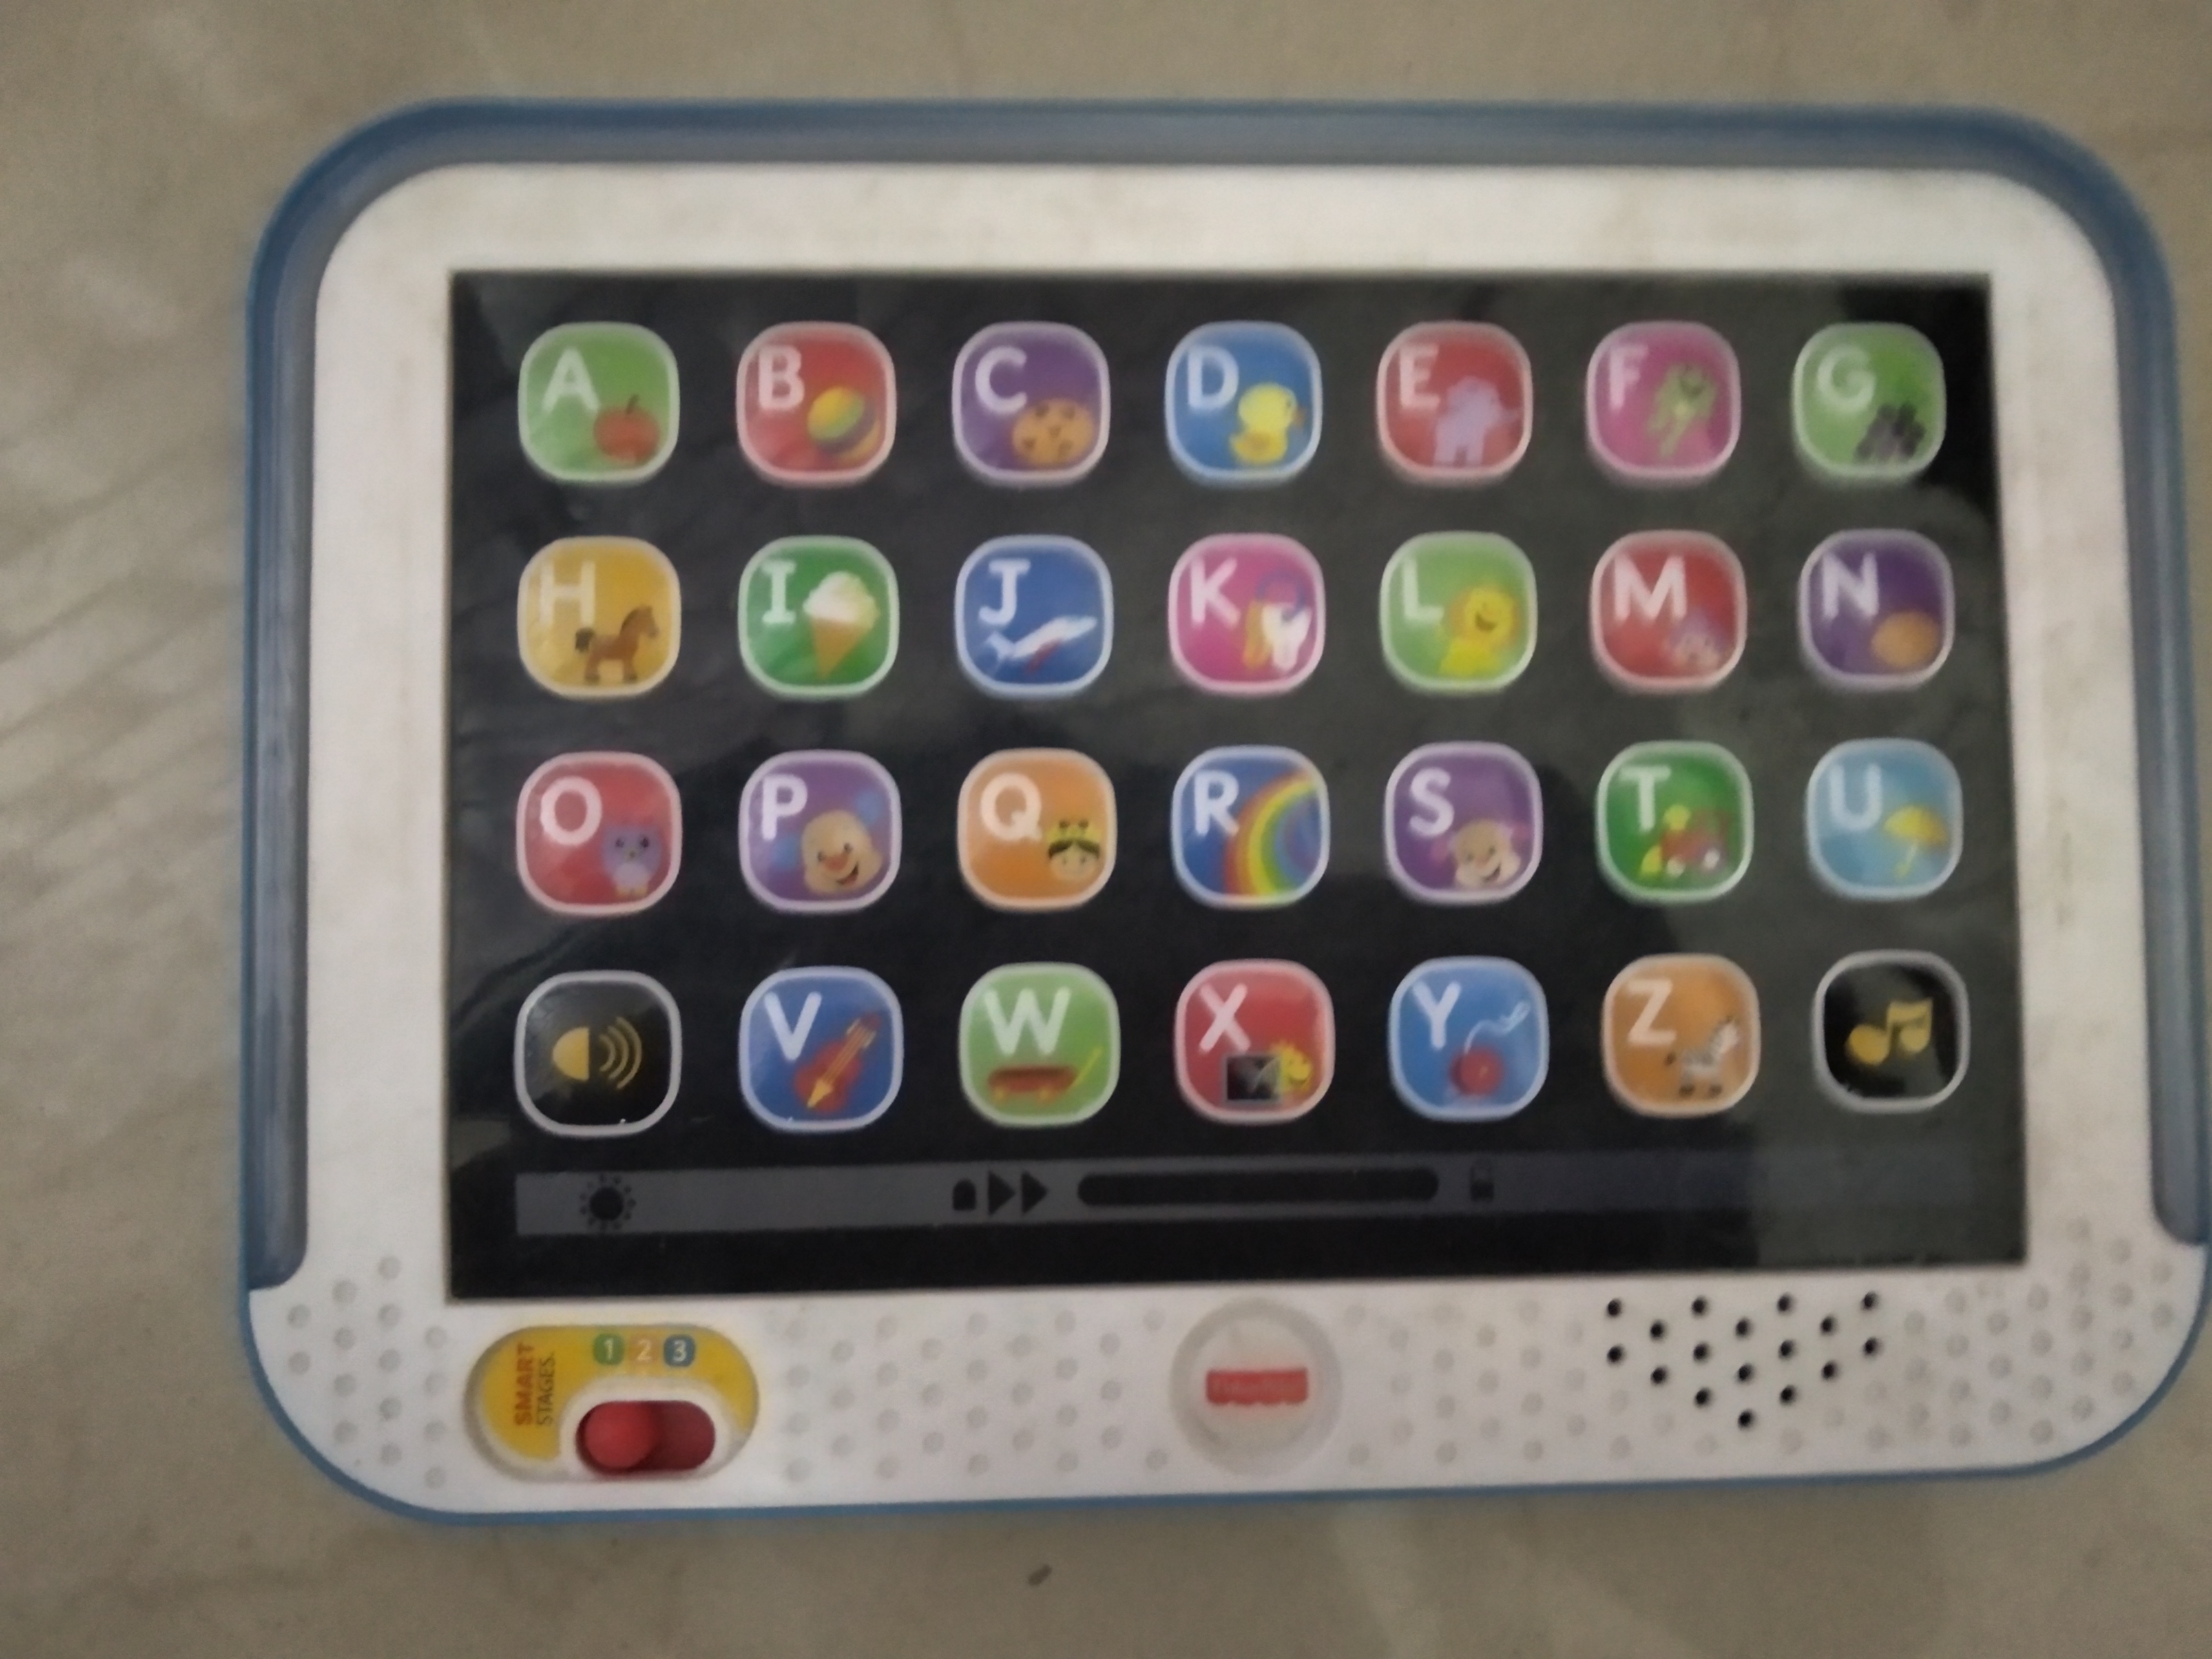 Fisher Price Laugh And Learn Smart Stages Tablet-Educational learning toy for children-By rima.israni108@gmail.com